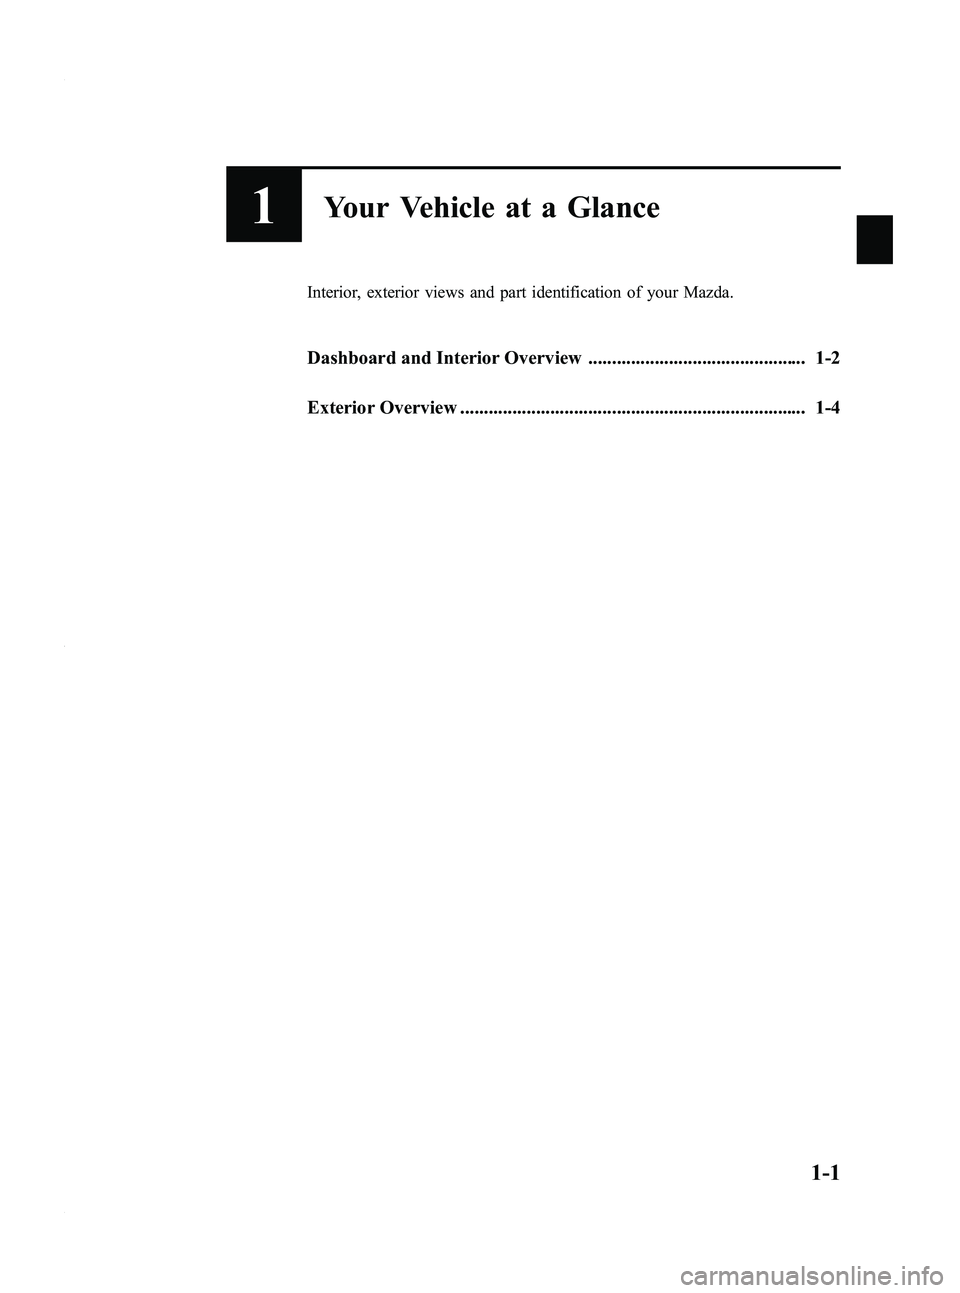 MAZDA MODEL 5 2010  Owners Manual Black plate (7,1)
1Your Vehicle at a Glance
Interior, exterior views and part identification of your Mazda.
Dashboard and Interior Overview .............................................. 1-2
Exterior 